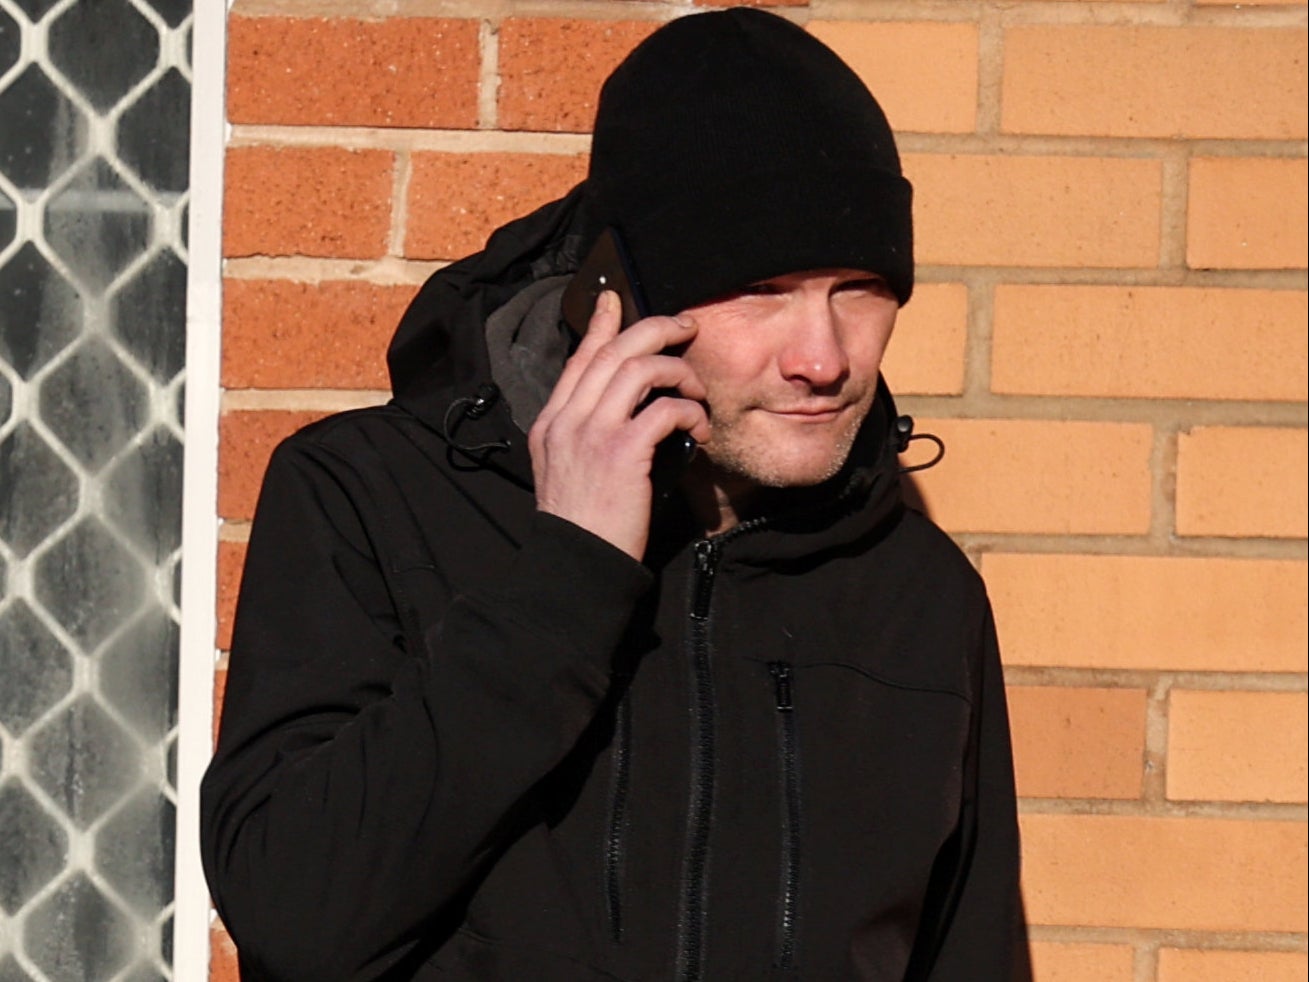 Haywood arrives at Swindon Magistrates’ Court for sentencing on Monday